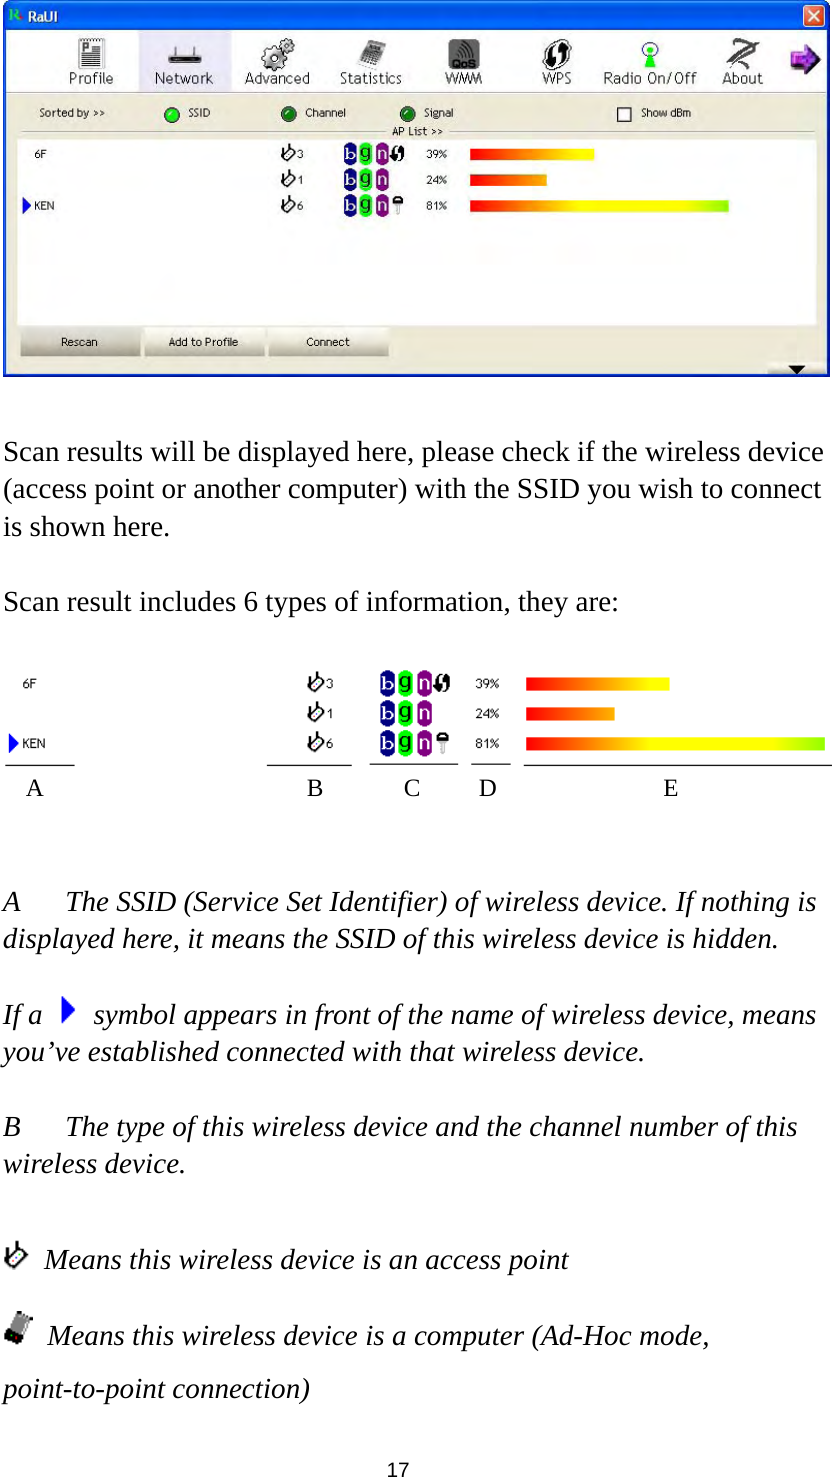  17   Scan results will be displayed here, please check if the wireless device (access point or another computer) with the SSID you wish to connect is shown here.  Scan result includes 6 types of information, they are:     A  The SSID (Service Set Identifier) of wireless device. If nothing is displayed here, it means the SSID of this wireless device is hidden.  If a    symbol appears in front of the name of wireless device, means you’ve established connected with that wireless device.  B  The type of this wireless device and the channel number of this wireless device.      Means this wireless device is an access point  Means this wireless device is a computer (Ad-Hoc mode, point-to-point connection) A B C D E 